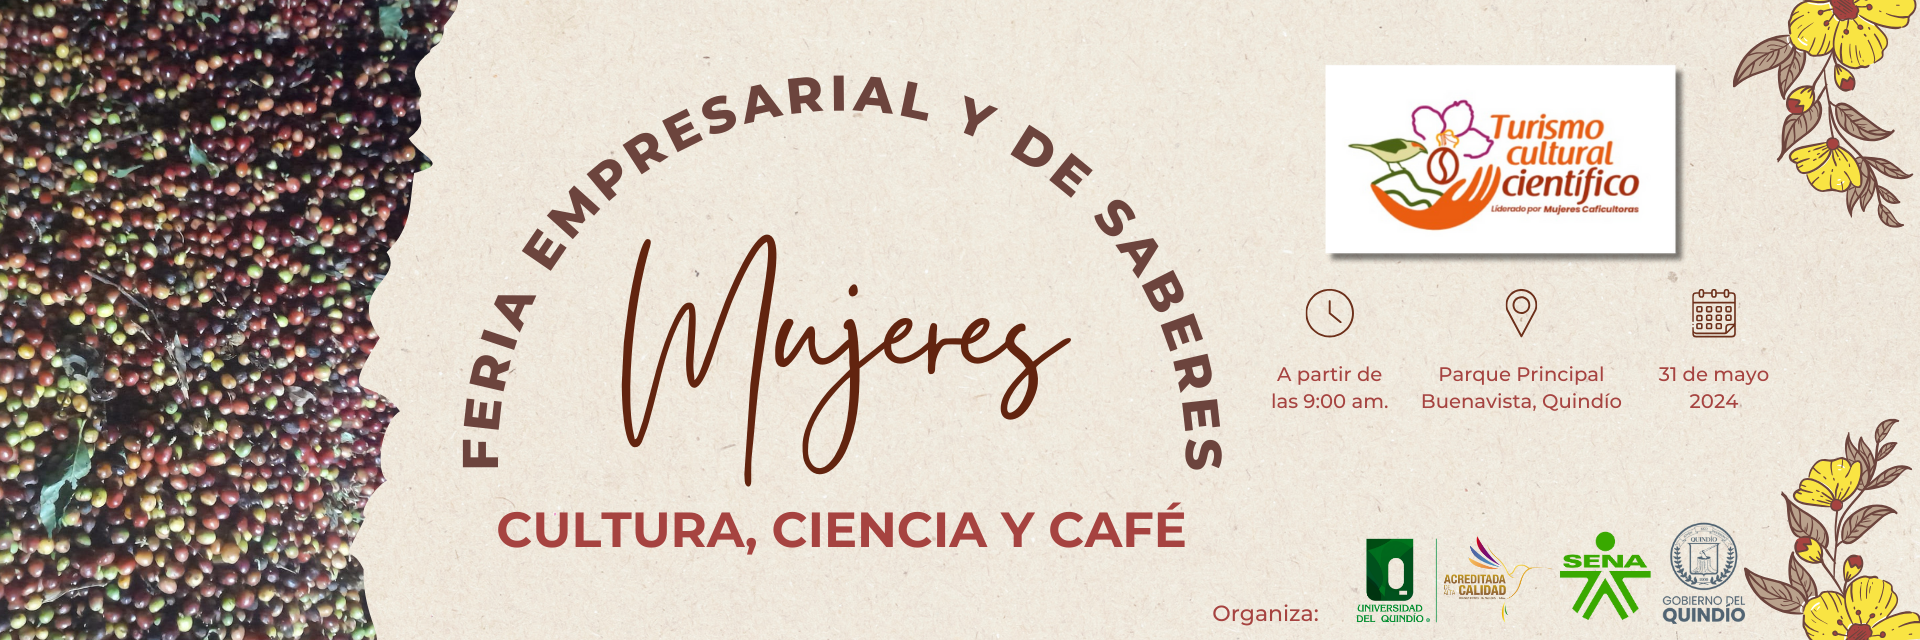 Banner_Mujeres_Cafeteras.png - 2.06 MB